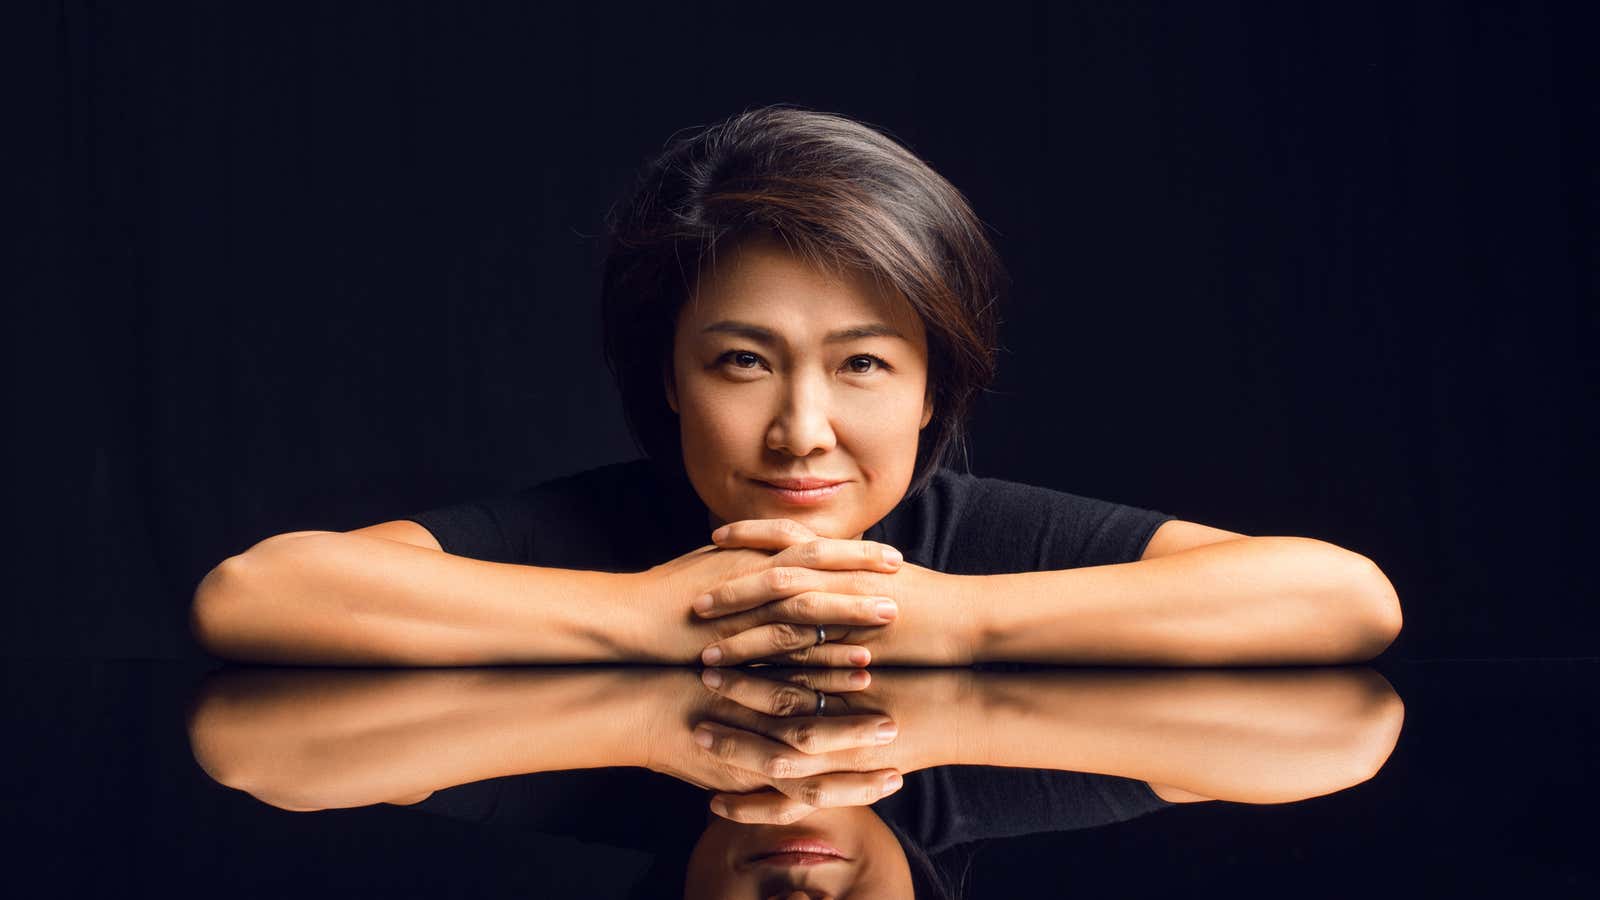 SOHO China CEO Zhang Xin became a billionaire by falling in love with risk